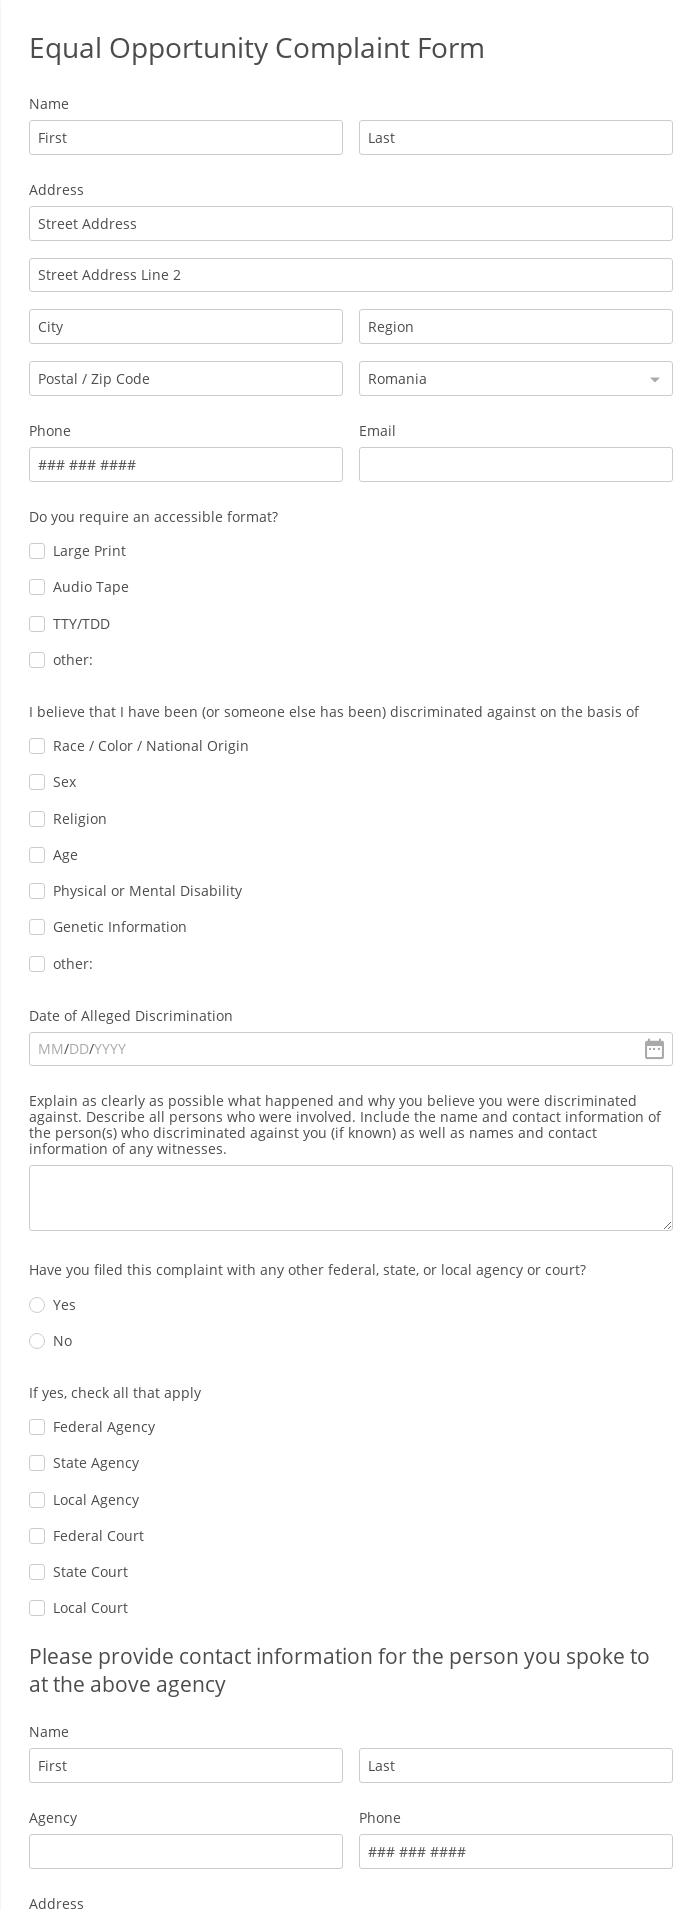 Equal Opportunity Complaint Form